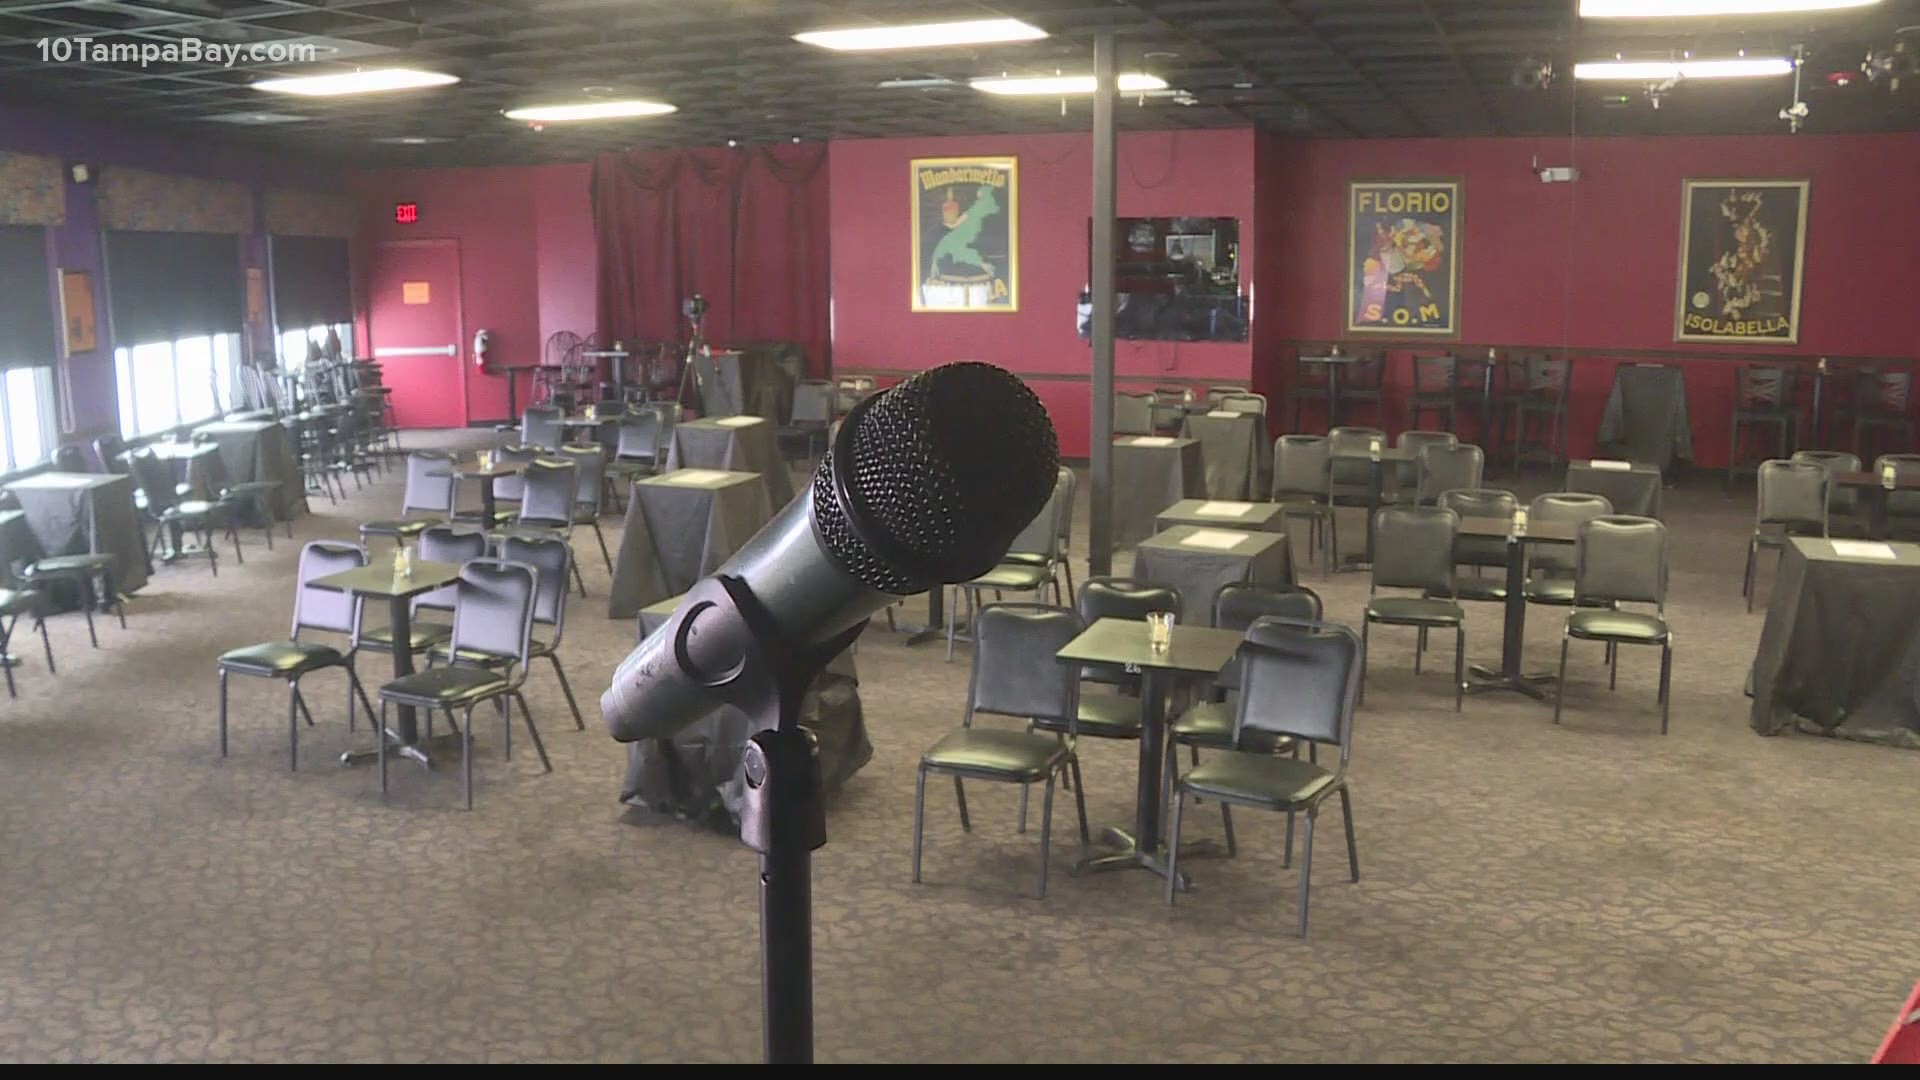 2020 has been a tough year and there's been very little to laugh about, but McCurdy's Comedy Club in Sarasota hopes to change that.